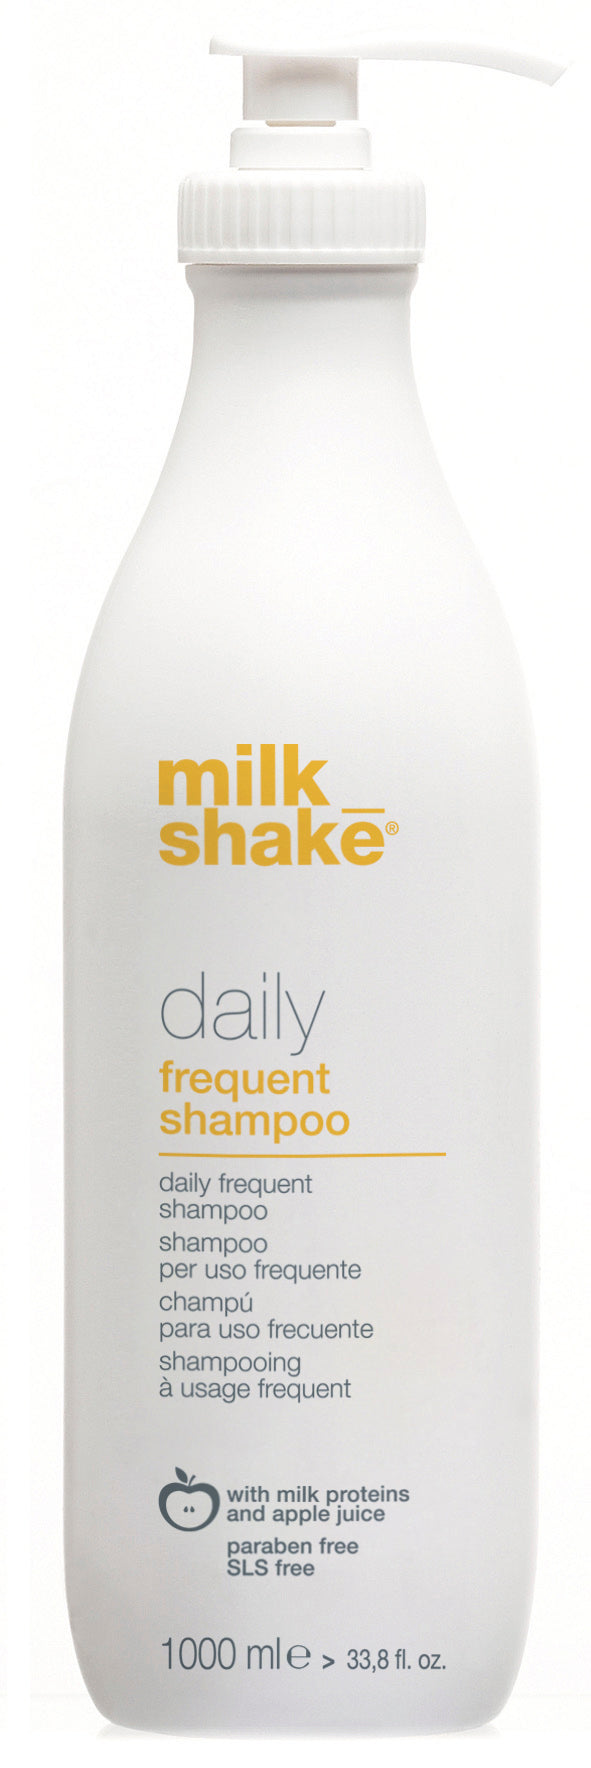 milk_shake daily frequent shampoo 1L